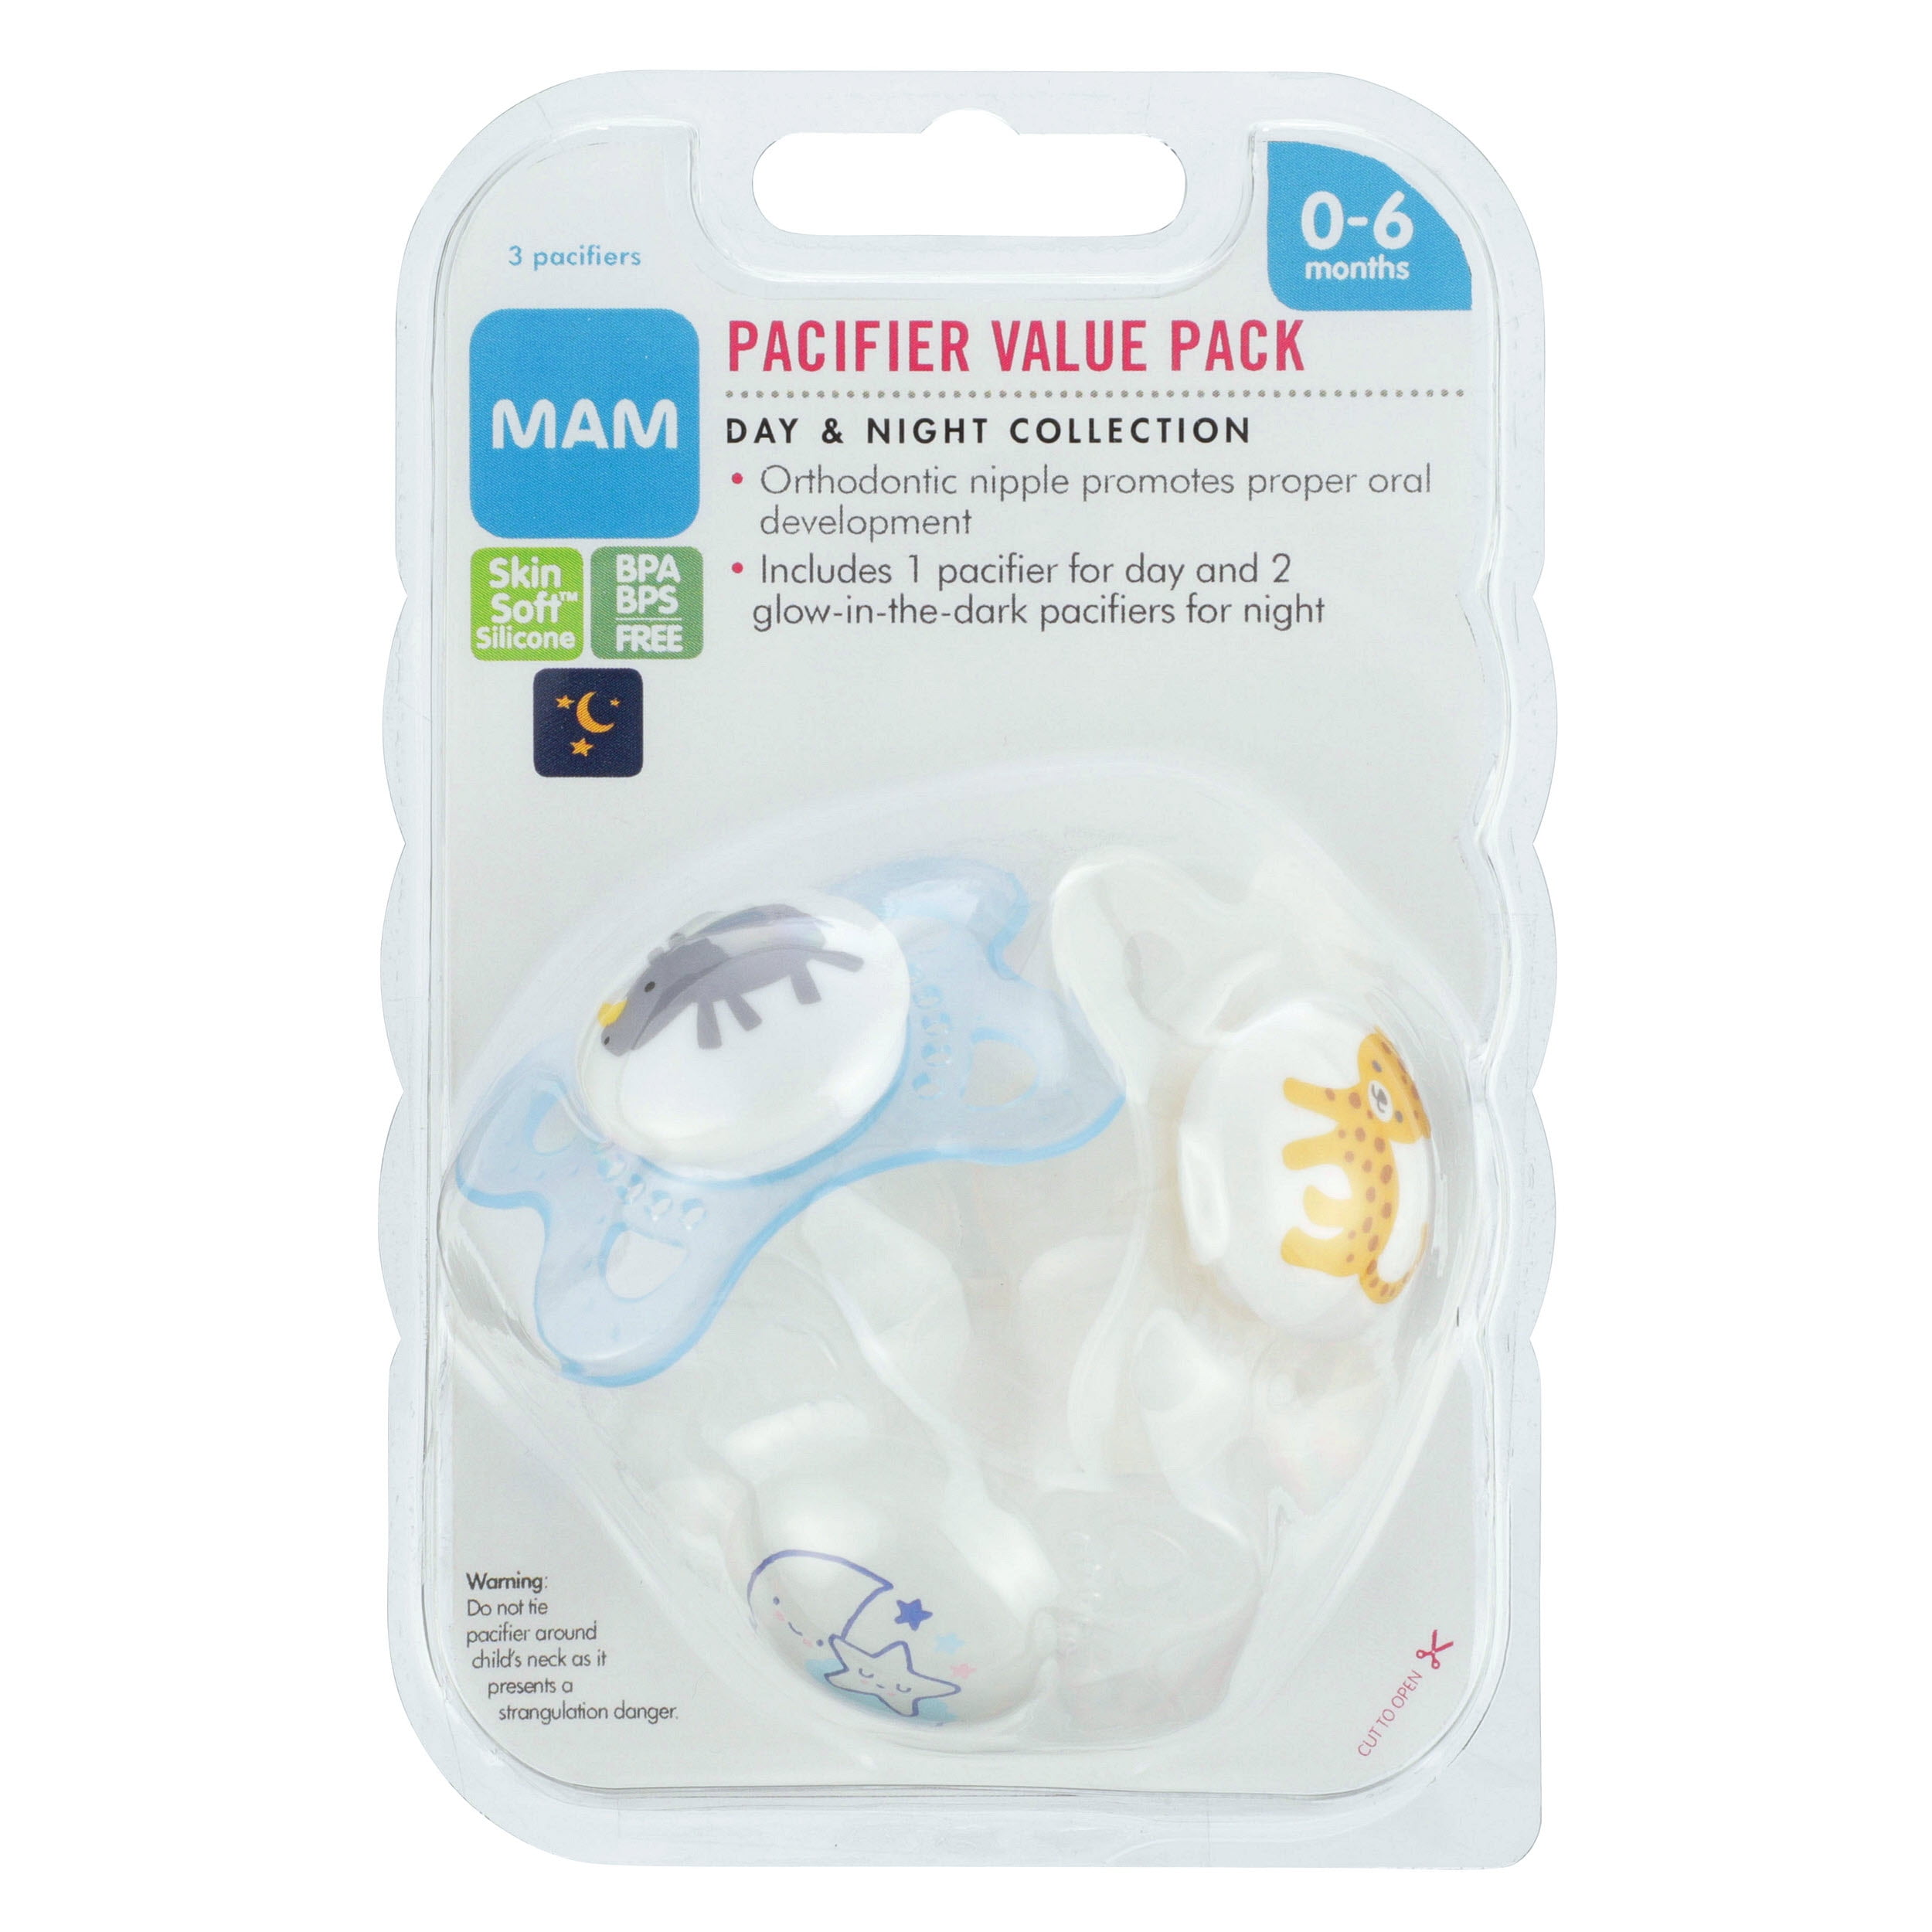 The Best Pacifiers for Breastfed Babies - Baby Chick